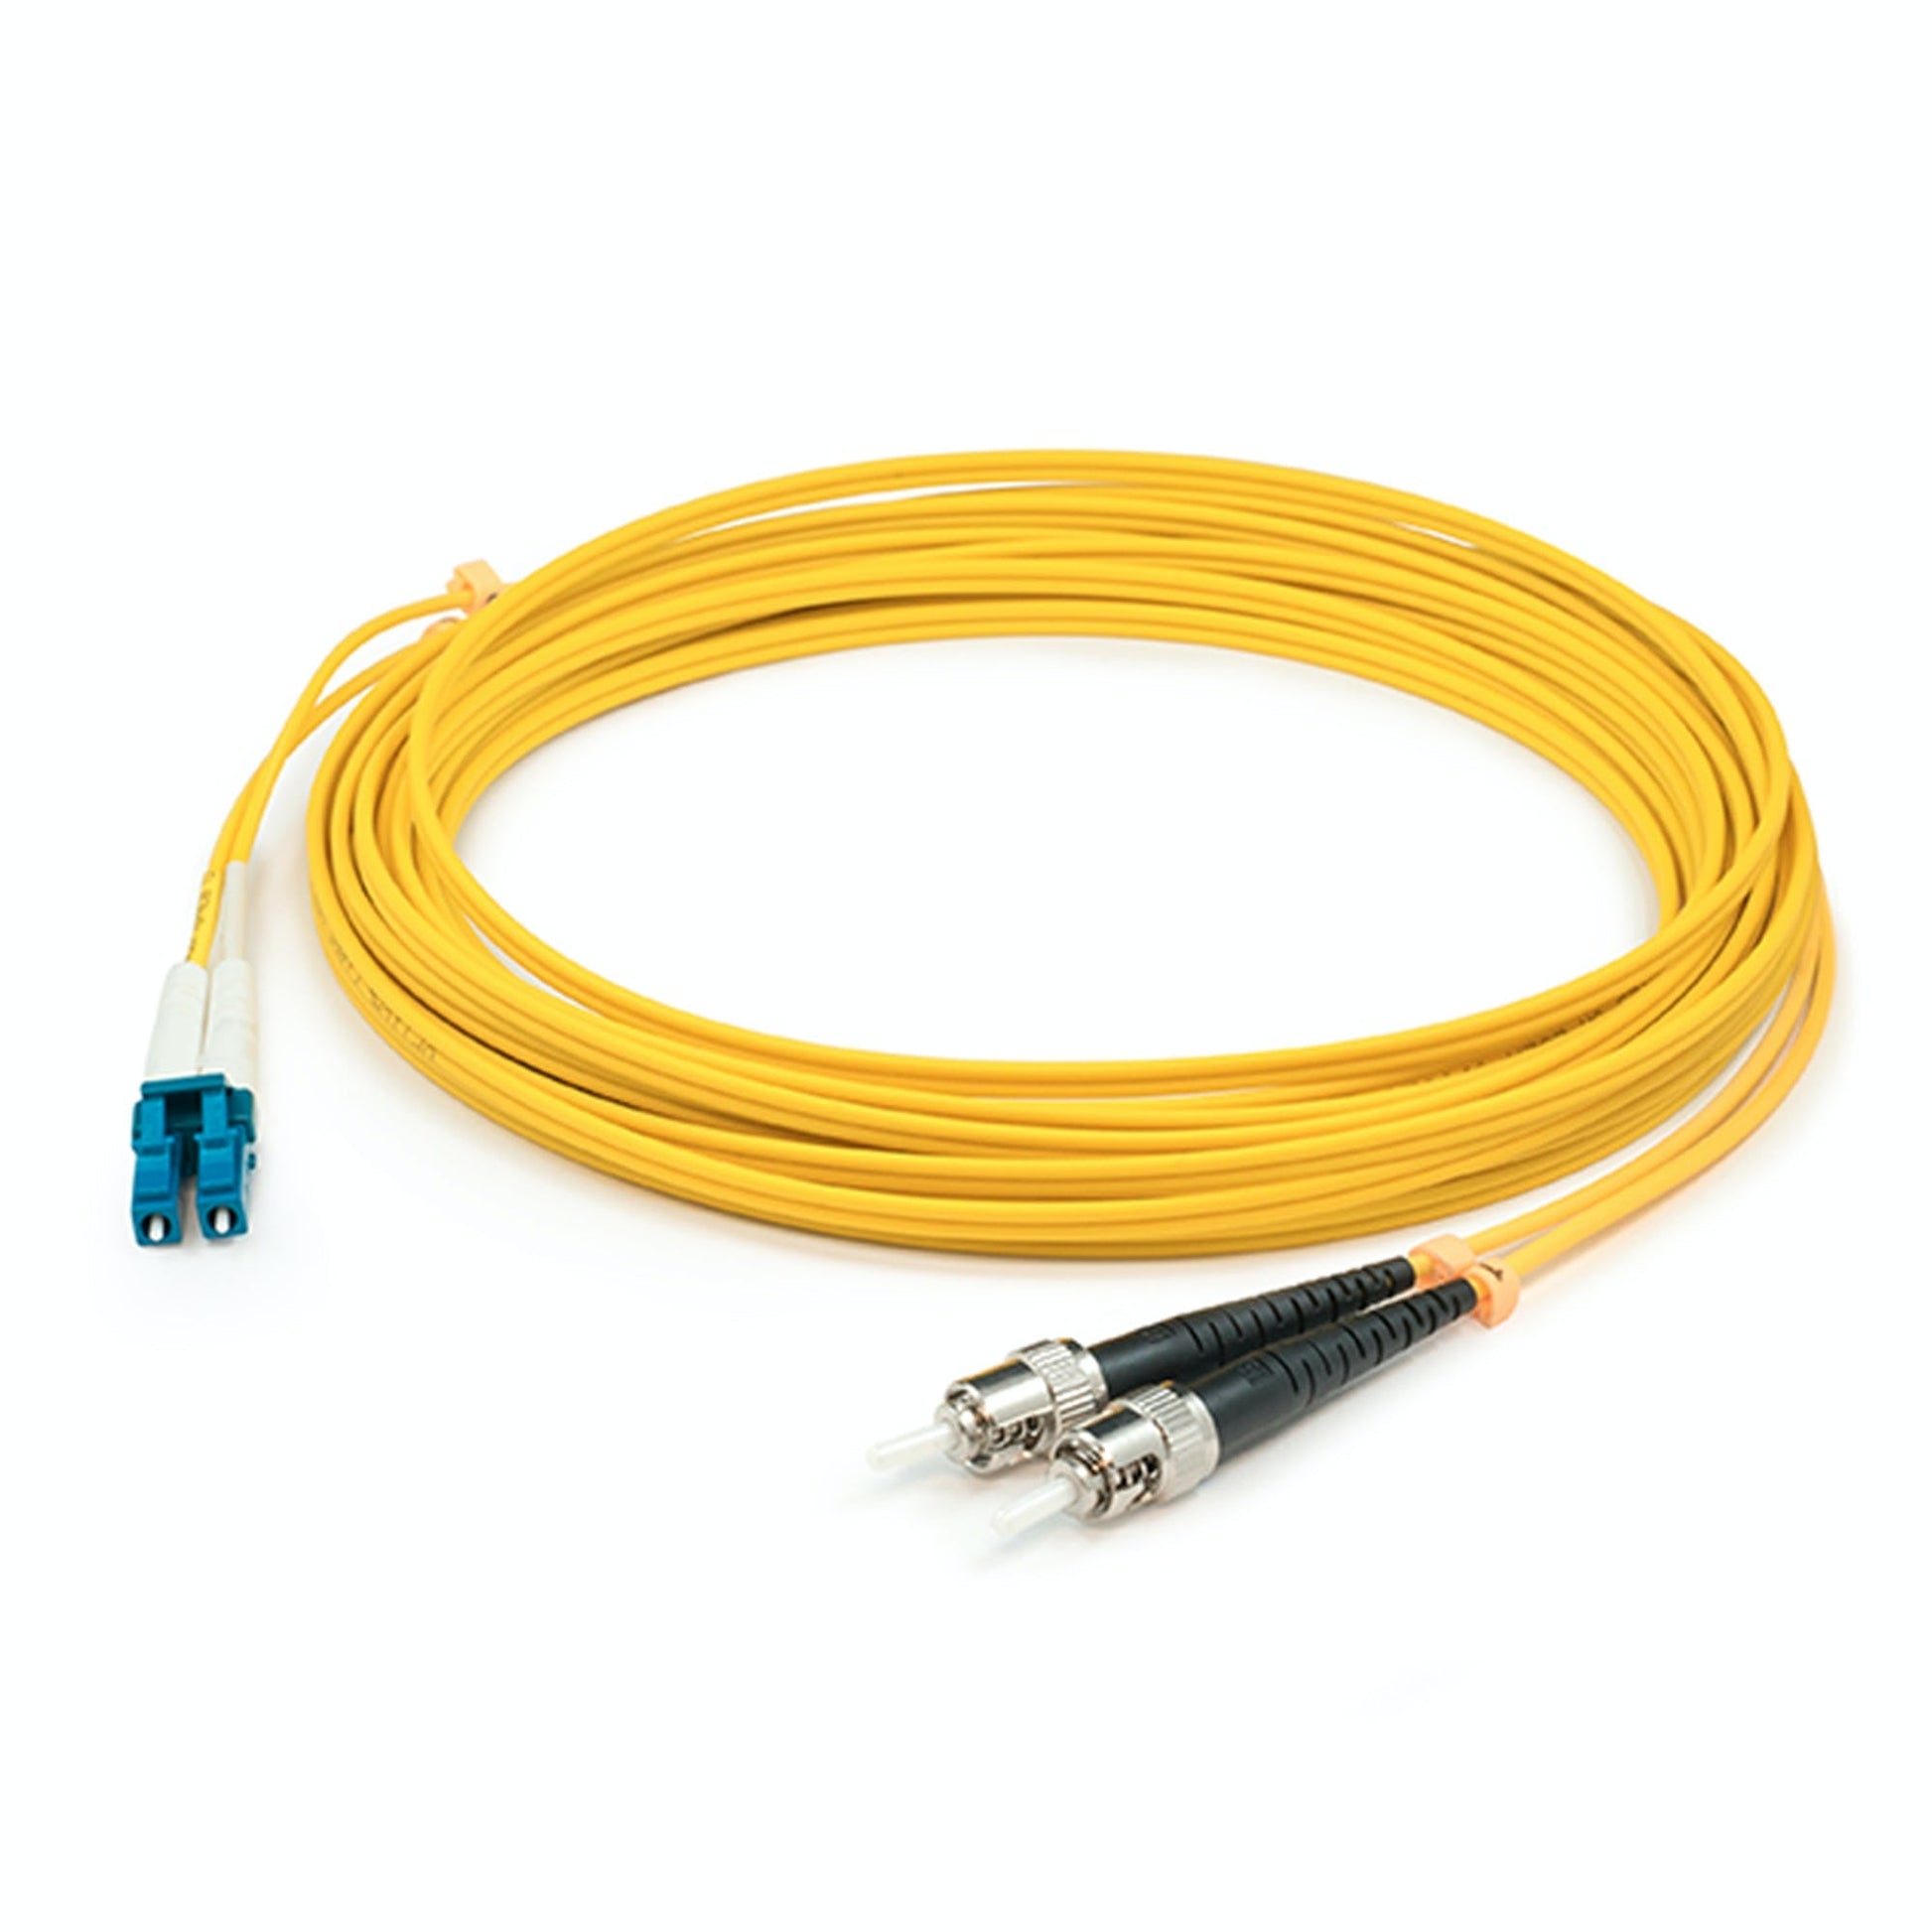 Addon Networks Add-St-Lc-25M9Smfp Fibre Optic Cable 25 M Ofnp Os2 Yellow